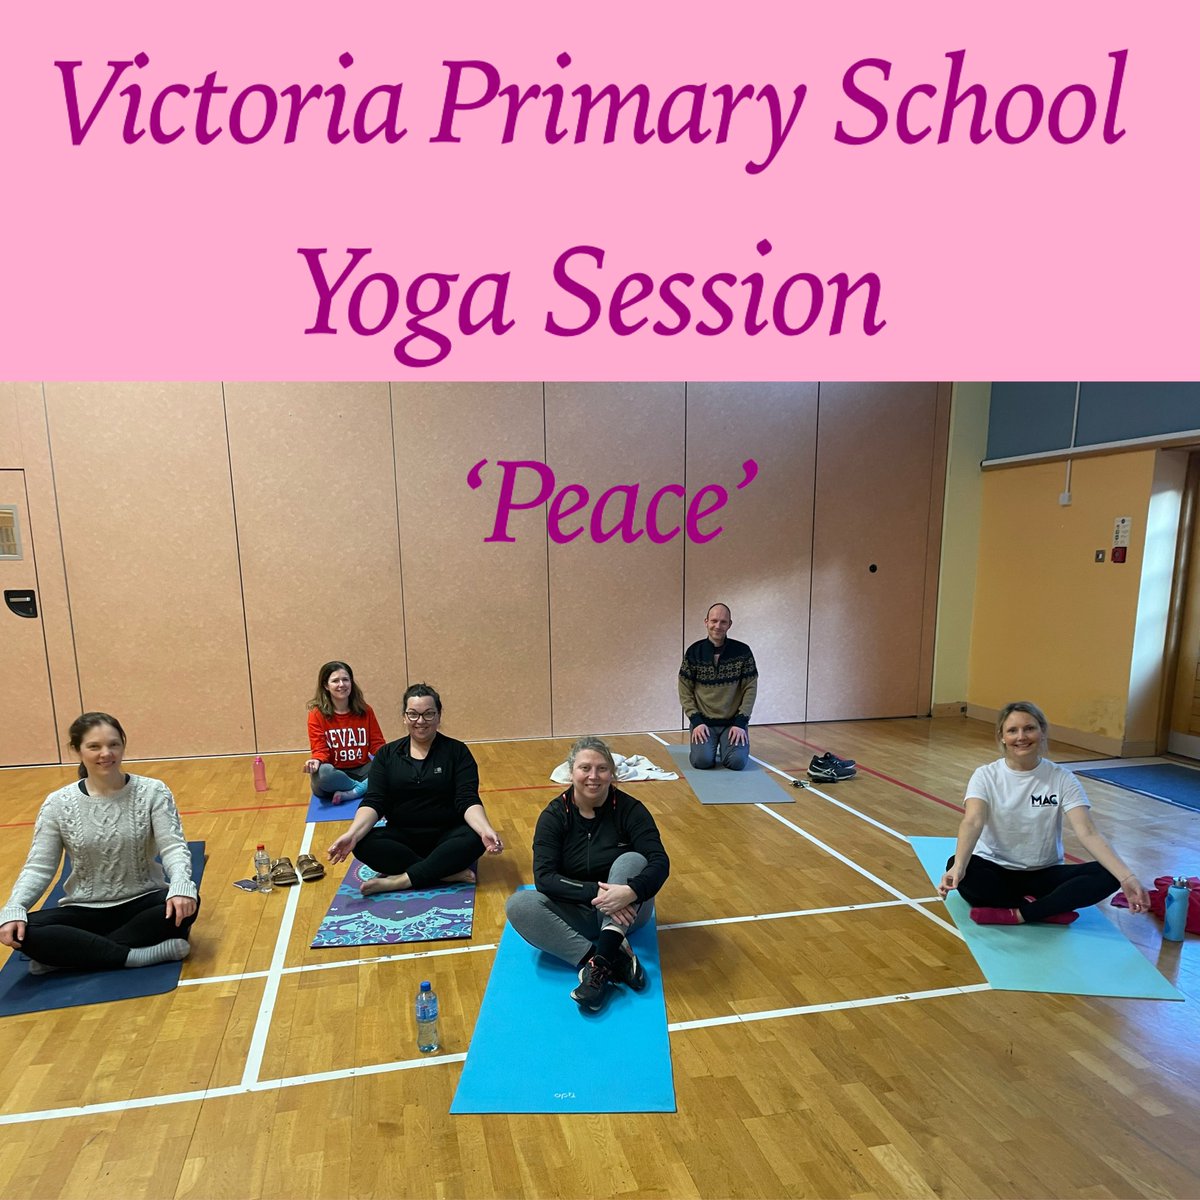 Yoga at Victoria Primary School, #affirmations ‘Peace’ very apt for the new year. Well done everyone! 🧘‍♀️🙏👏👏👏

‘Do not let the behaviour of others destroy your inner peace’ - Dalai Lama
✨
#schoolyoga #mentalwellbeing #amareyogabyvictoria #breathe #newtownards #communityyoga